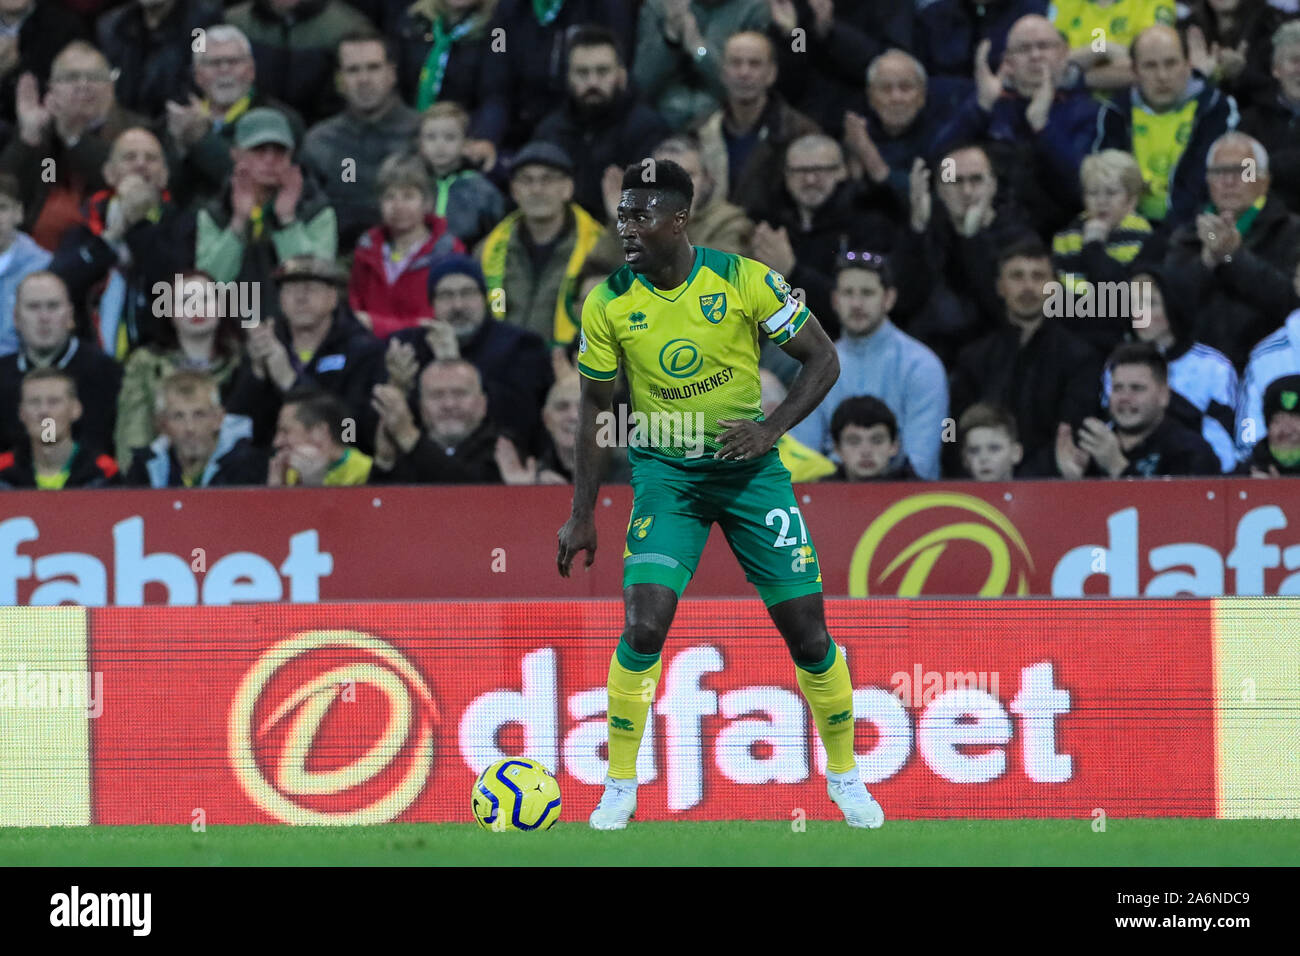 27th October 2019, Carrow Road, Norwich, England; Premier League, Norwich City v Manchester United : Alexander Tettey (27) of Norwich City during the game Credit: Mark Cosgrove/News Images Stock Photo